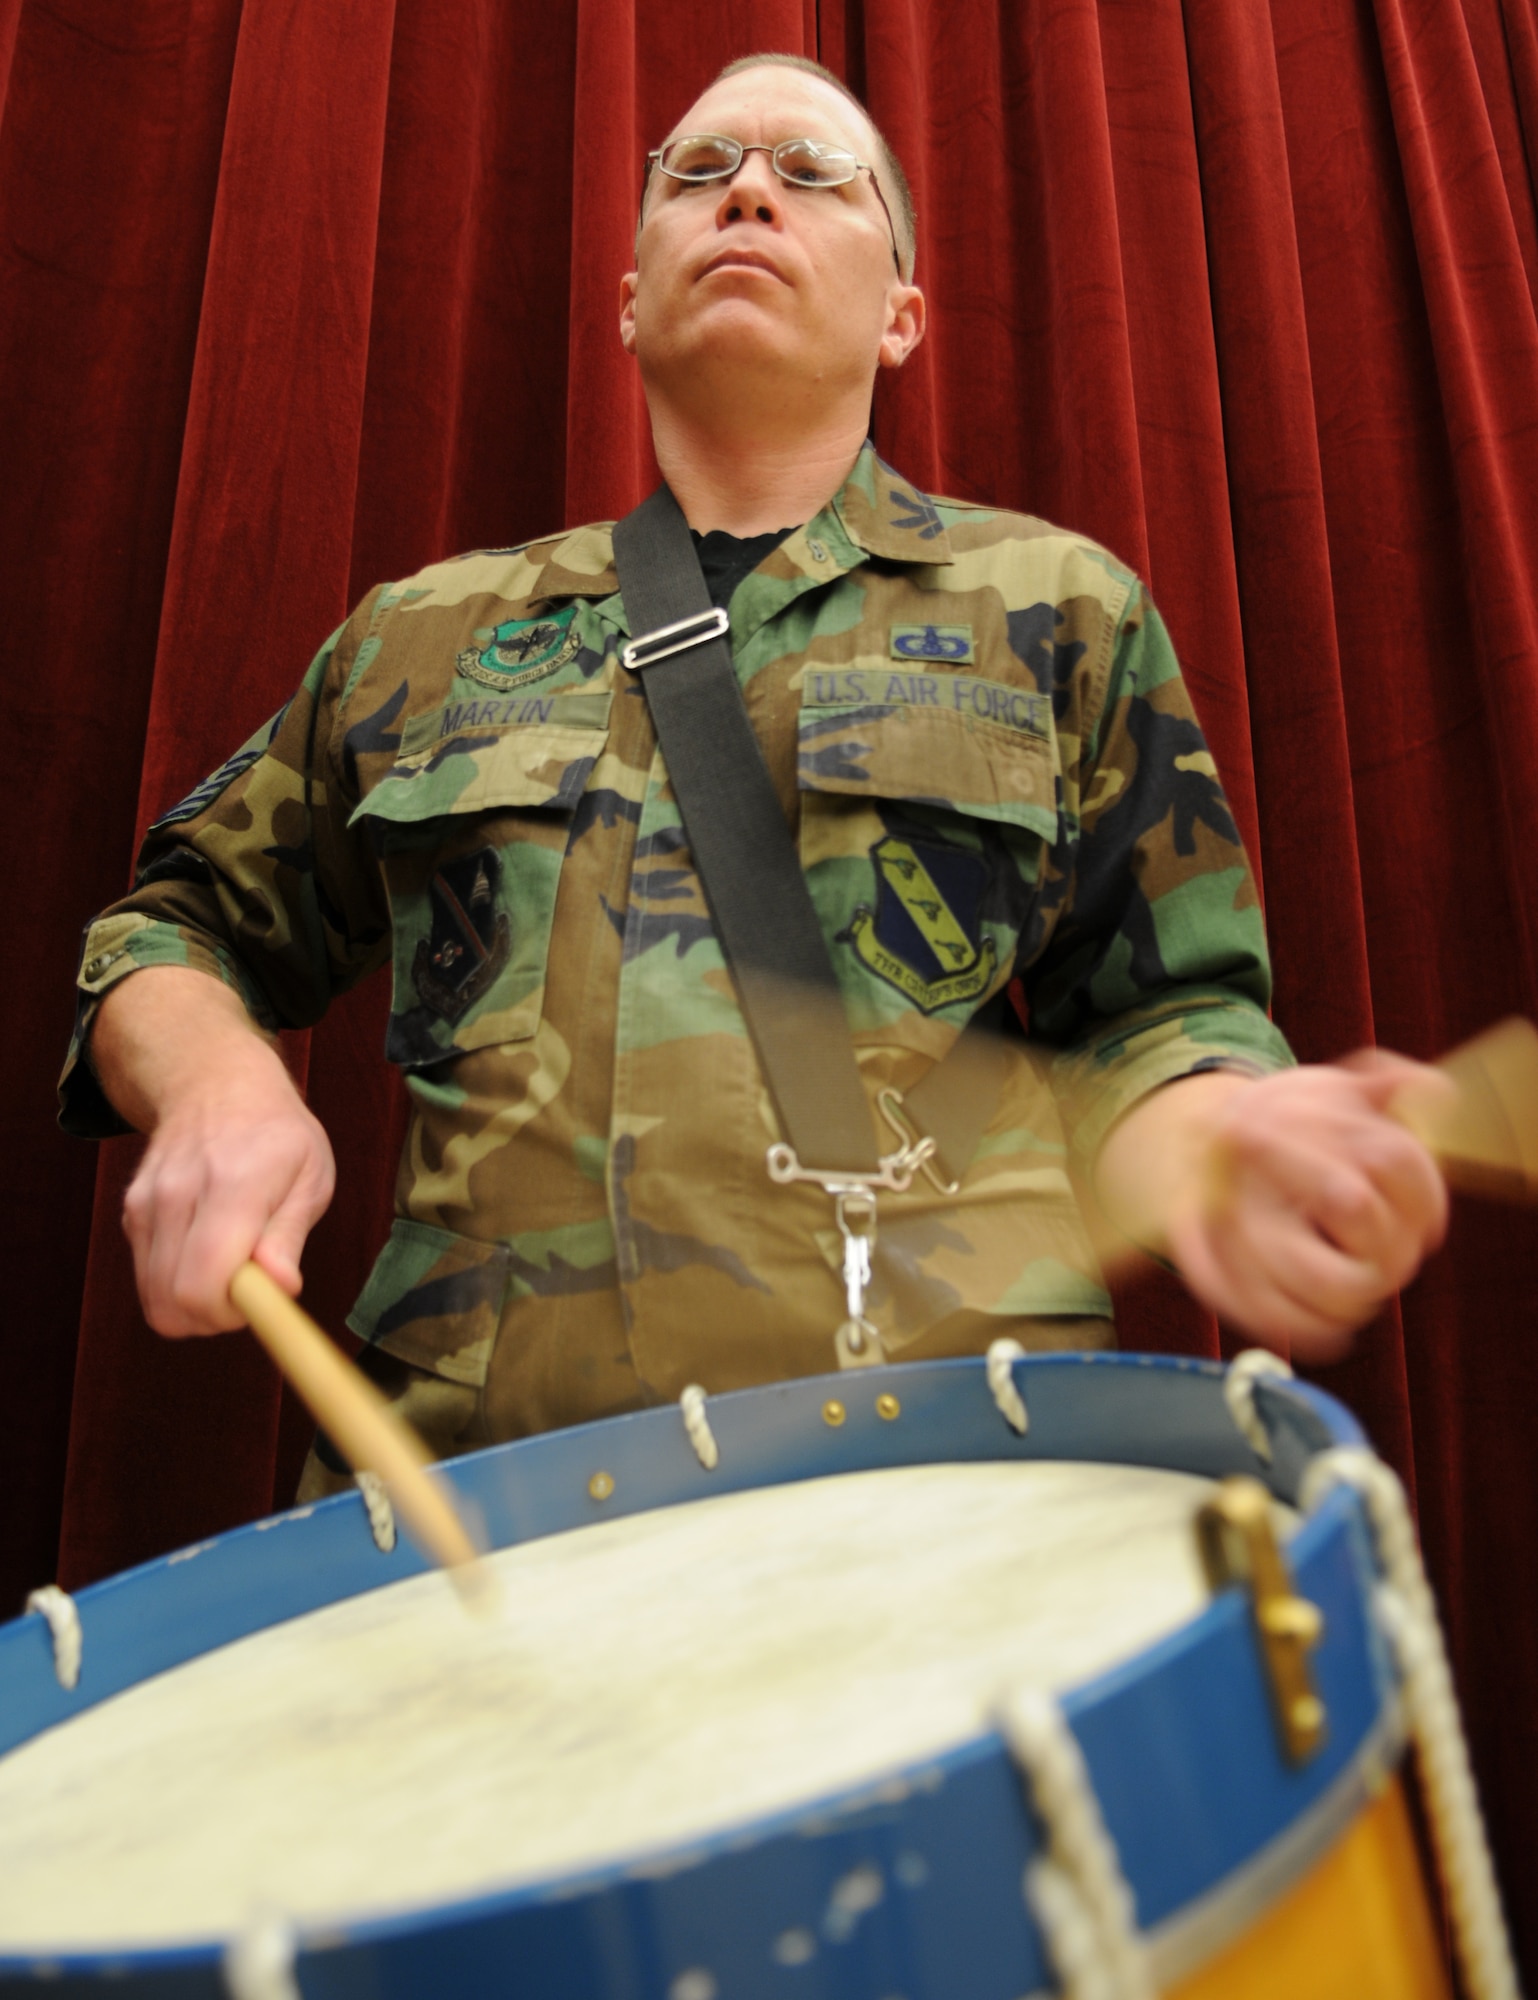 U.S. Air Force Band Ceremonial Bandsman Master Sgt. Christopher Martin, pictured here in hangar two on Joint Base Anacostia-Bolling, Washington D.C., demonstrates the revolutionary war era drum that will be used to provide marching cadence for the Joint Color Guard during opening ceremonies for Super Bowl XLV in Dallas, Texas Sunday, Feb. 6. Sergeant Martin will travel to Dallas with another Air Force drummer and a color team Airman from The U.S. Air Force Honor Guard. (U.S. Air Force photo illustration by Senior Airman Christopher Ruano)